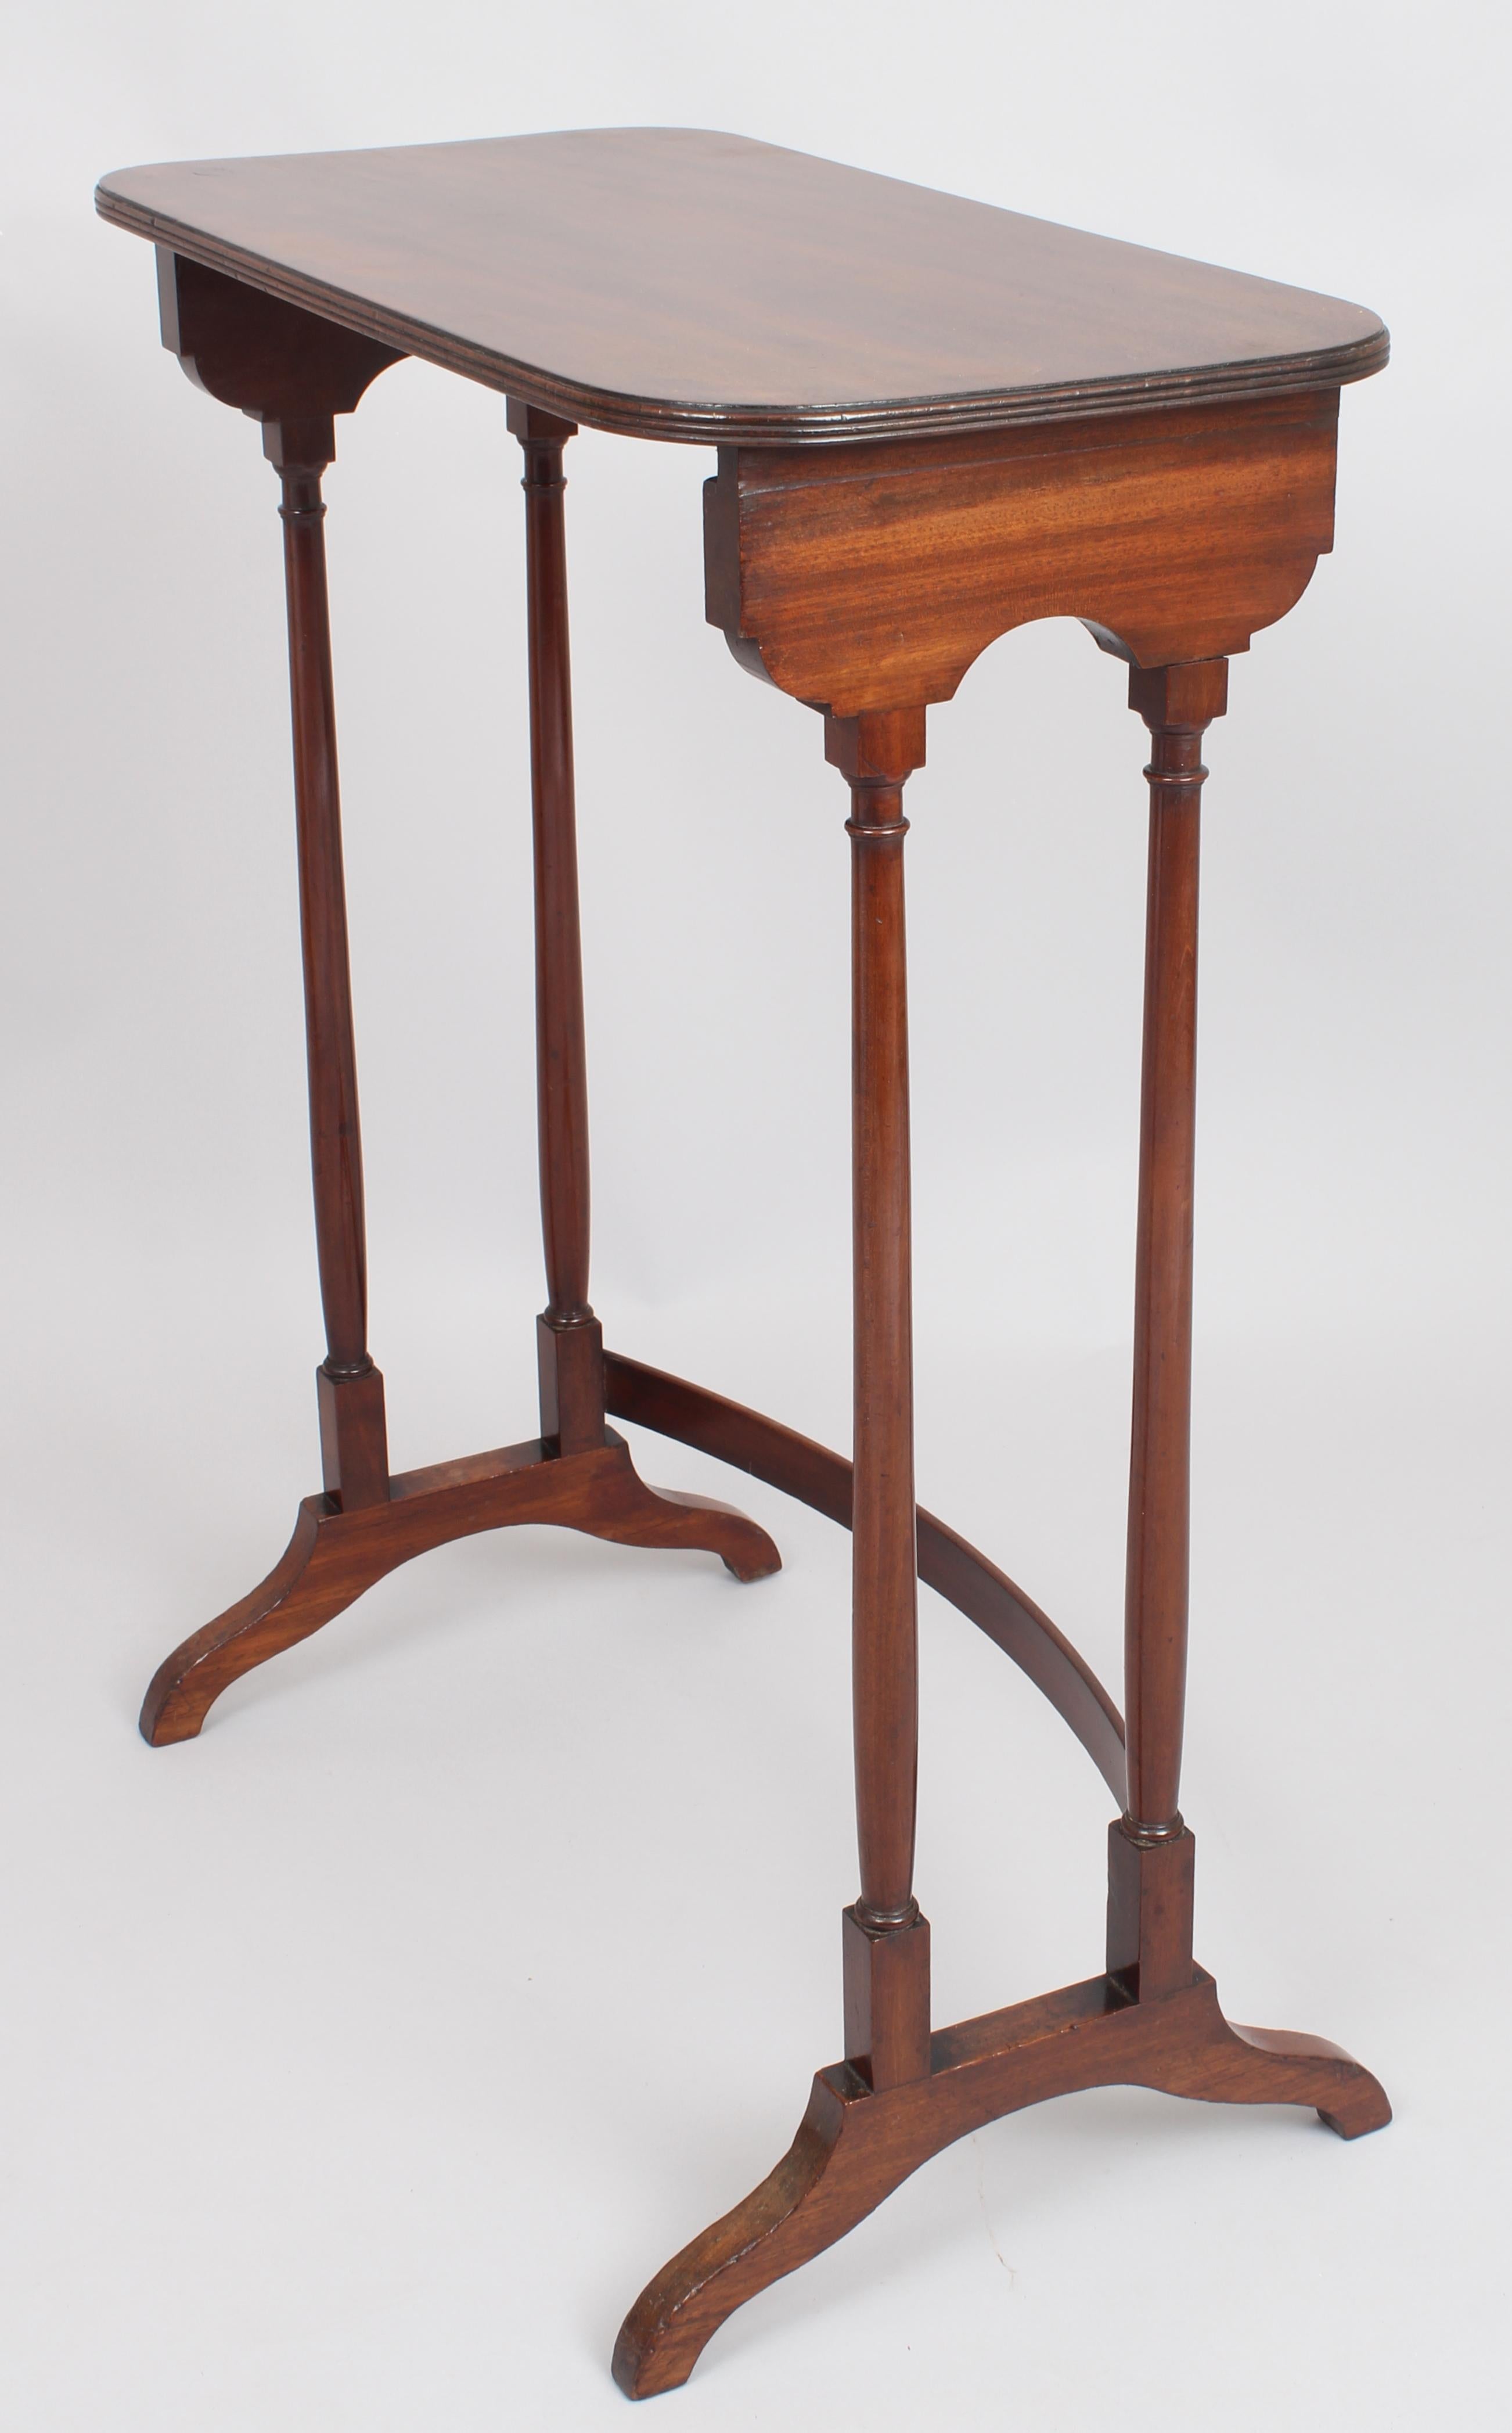 Early 19th Century Particularly Fine George III Period Mahogany Set of Quartetto Tables For Sale